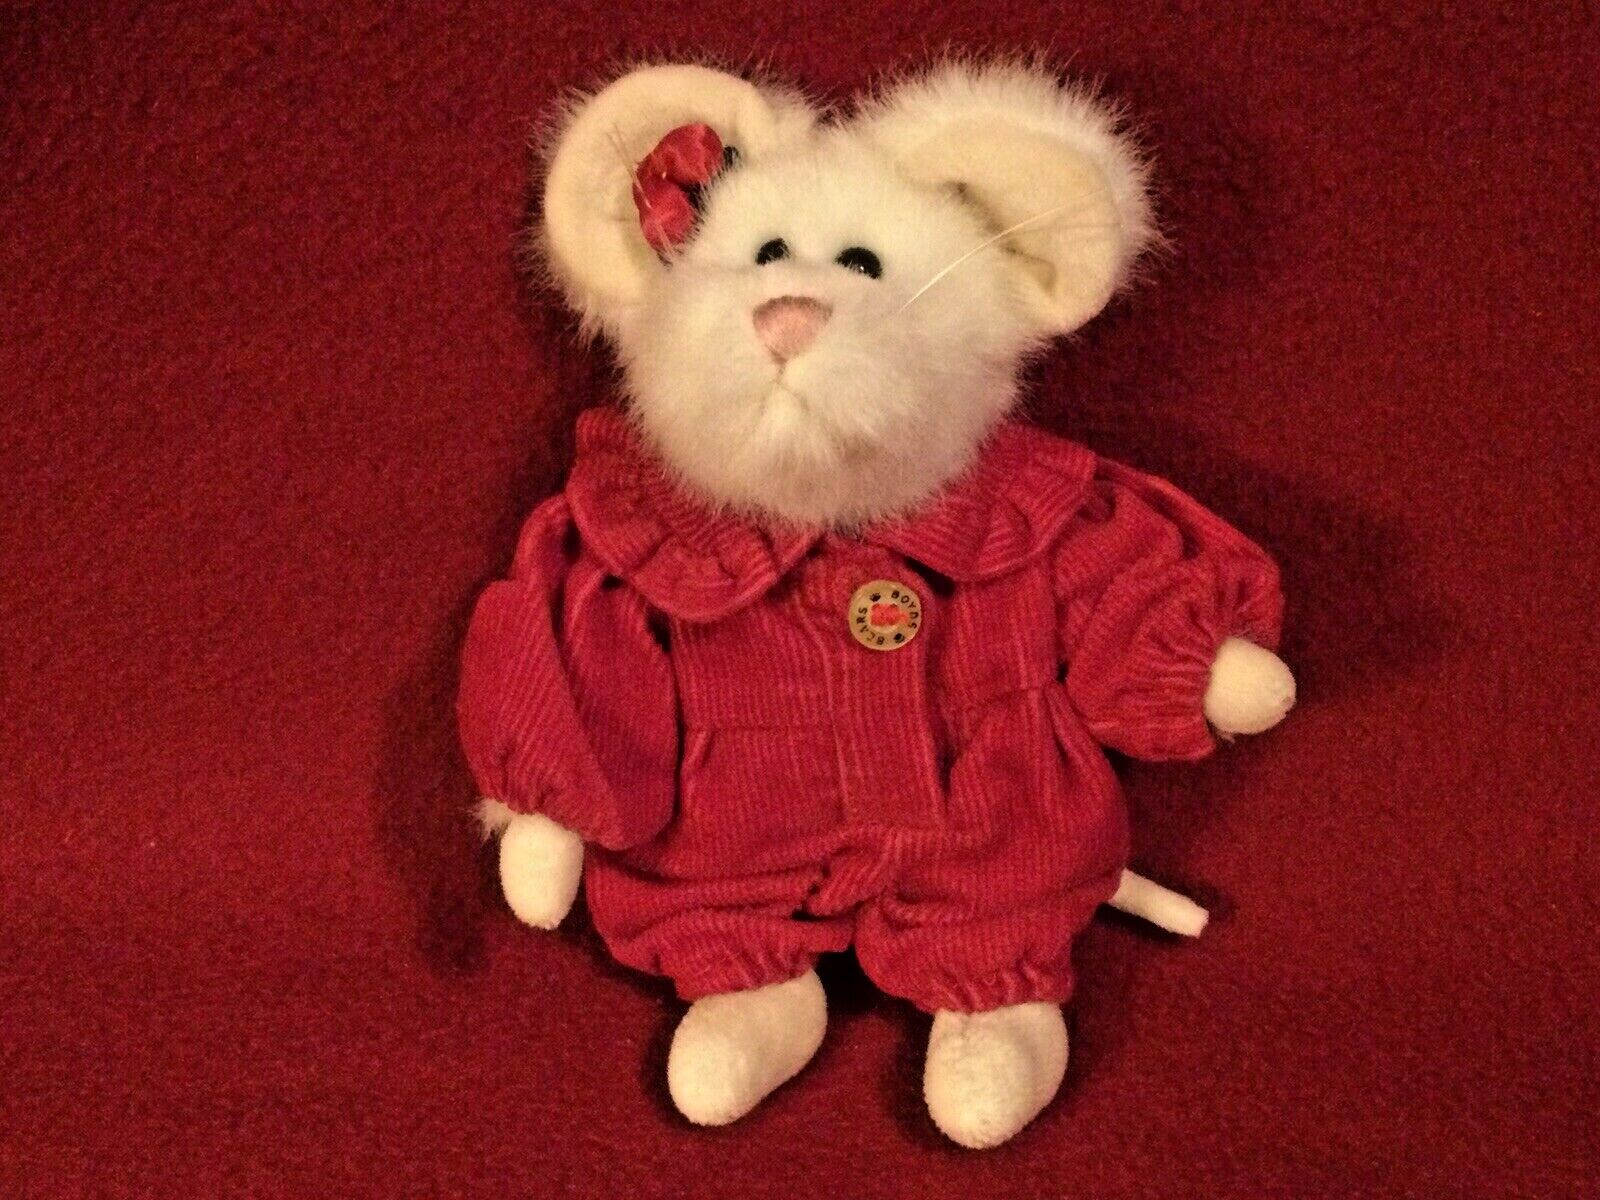 Boyds Bears 1999 “Monterey Mouski” Mouse approx. 6”